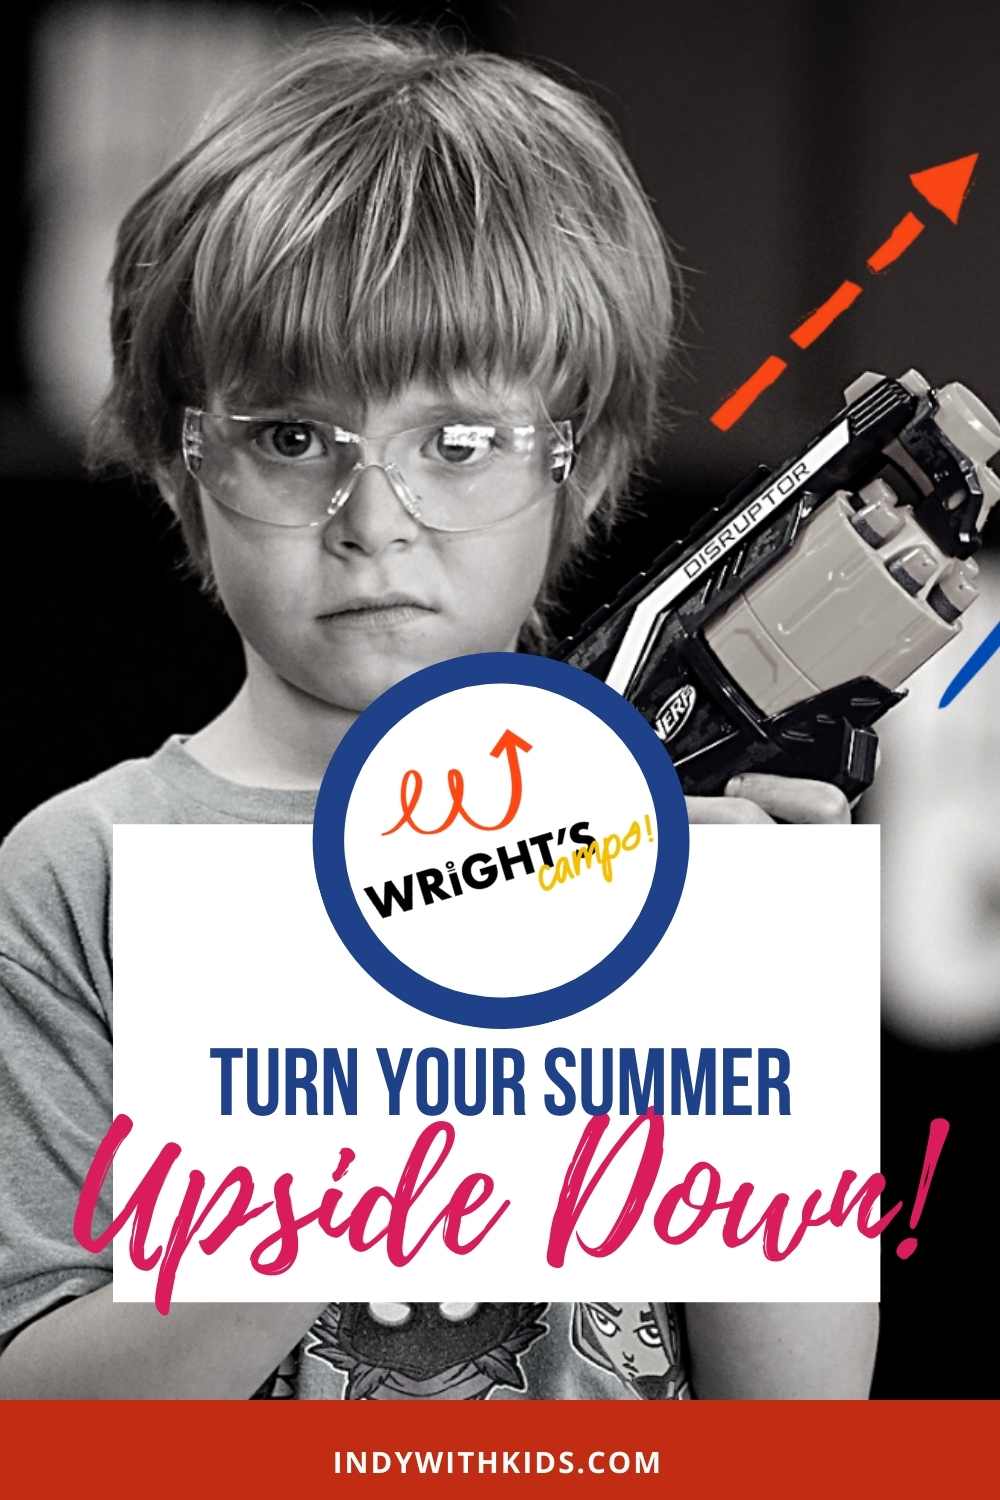 Wright's Summer Camp Boy with a nerf gun